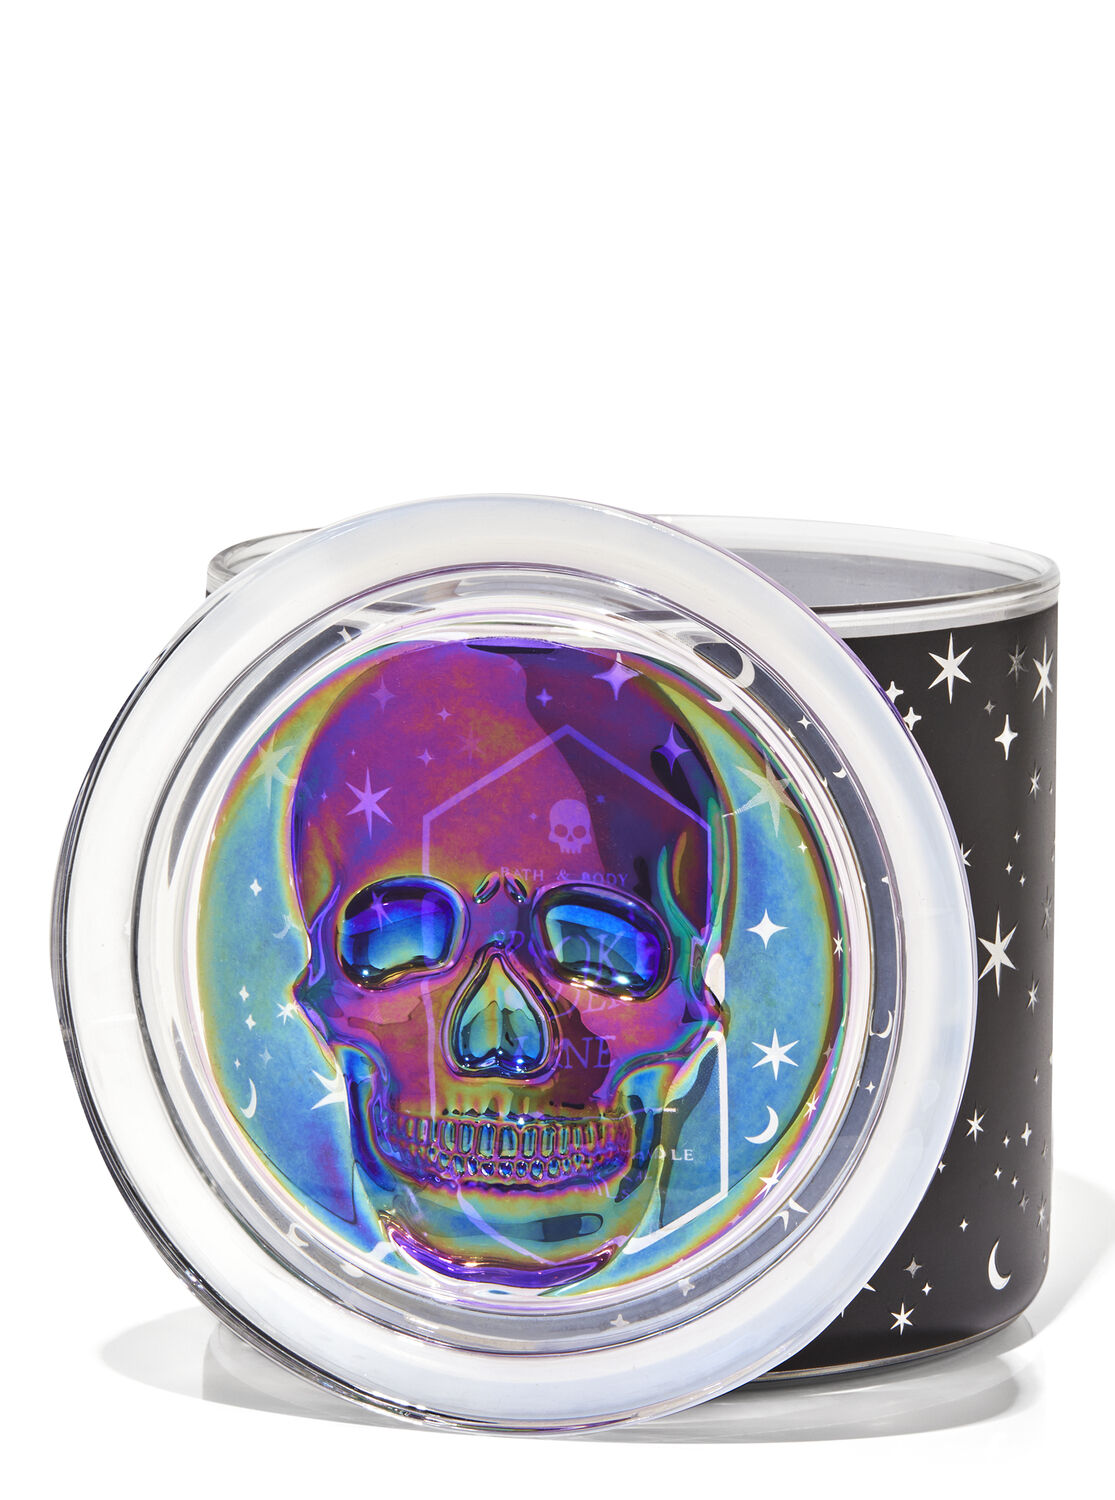 Spooky Cider Lane 3-Wick Candle | Bath & Body Works